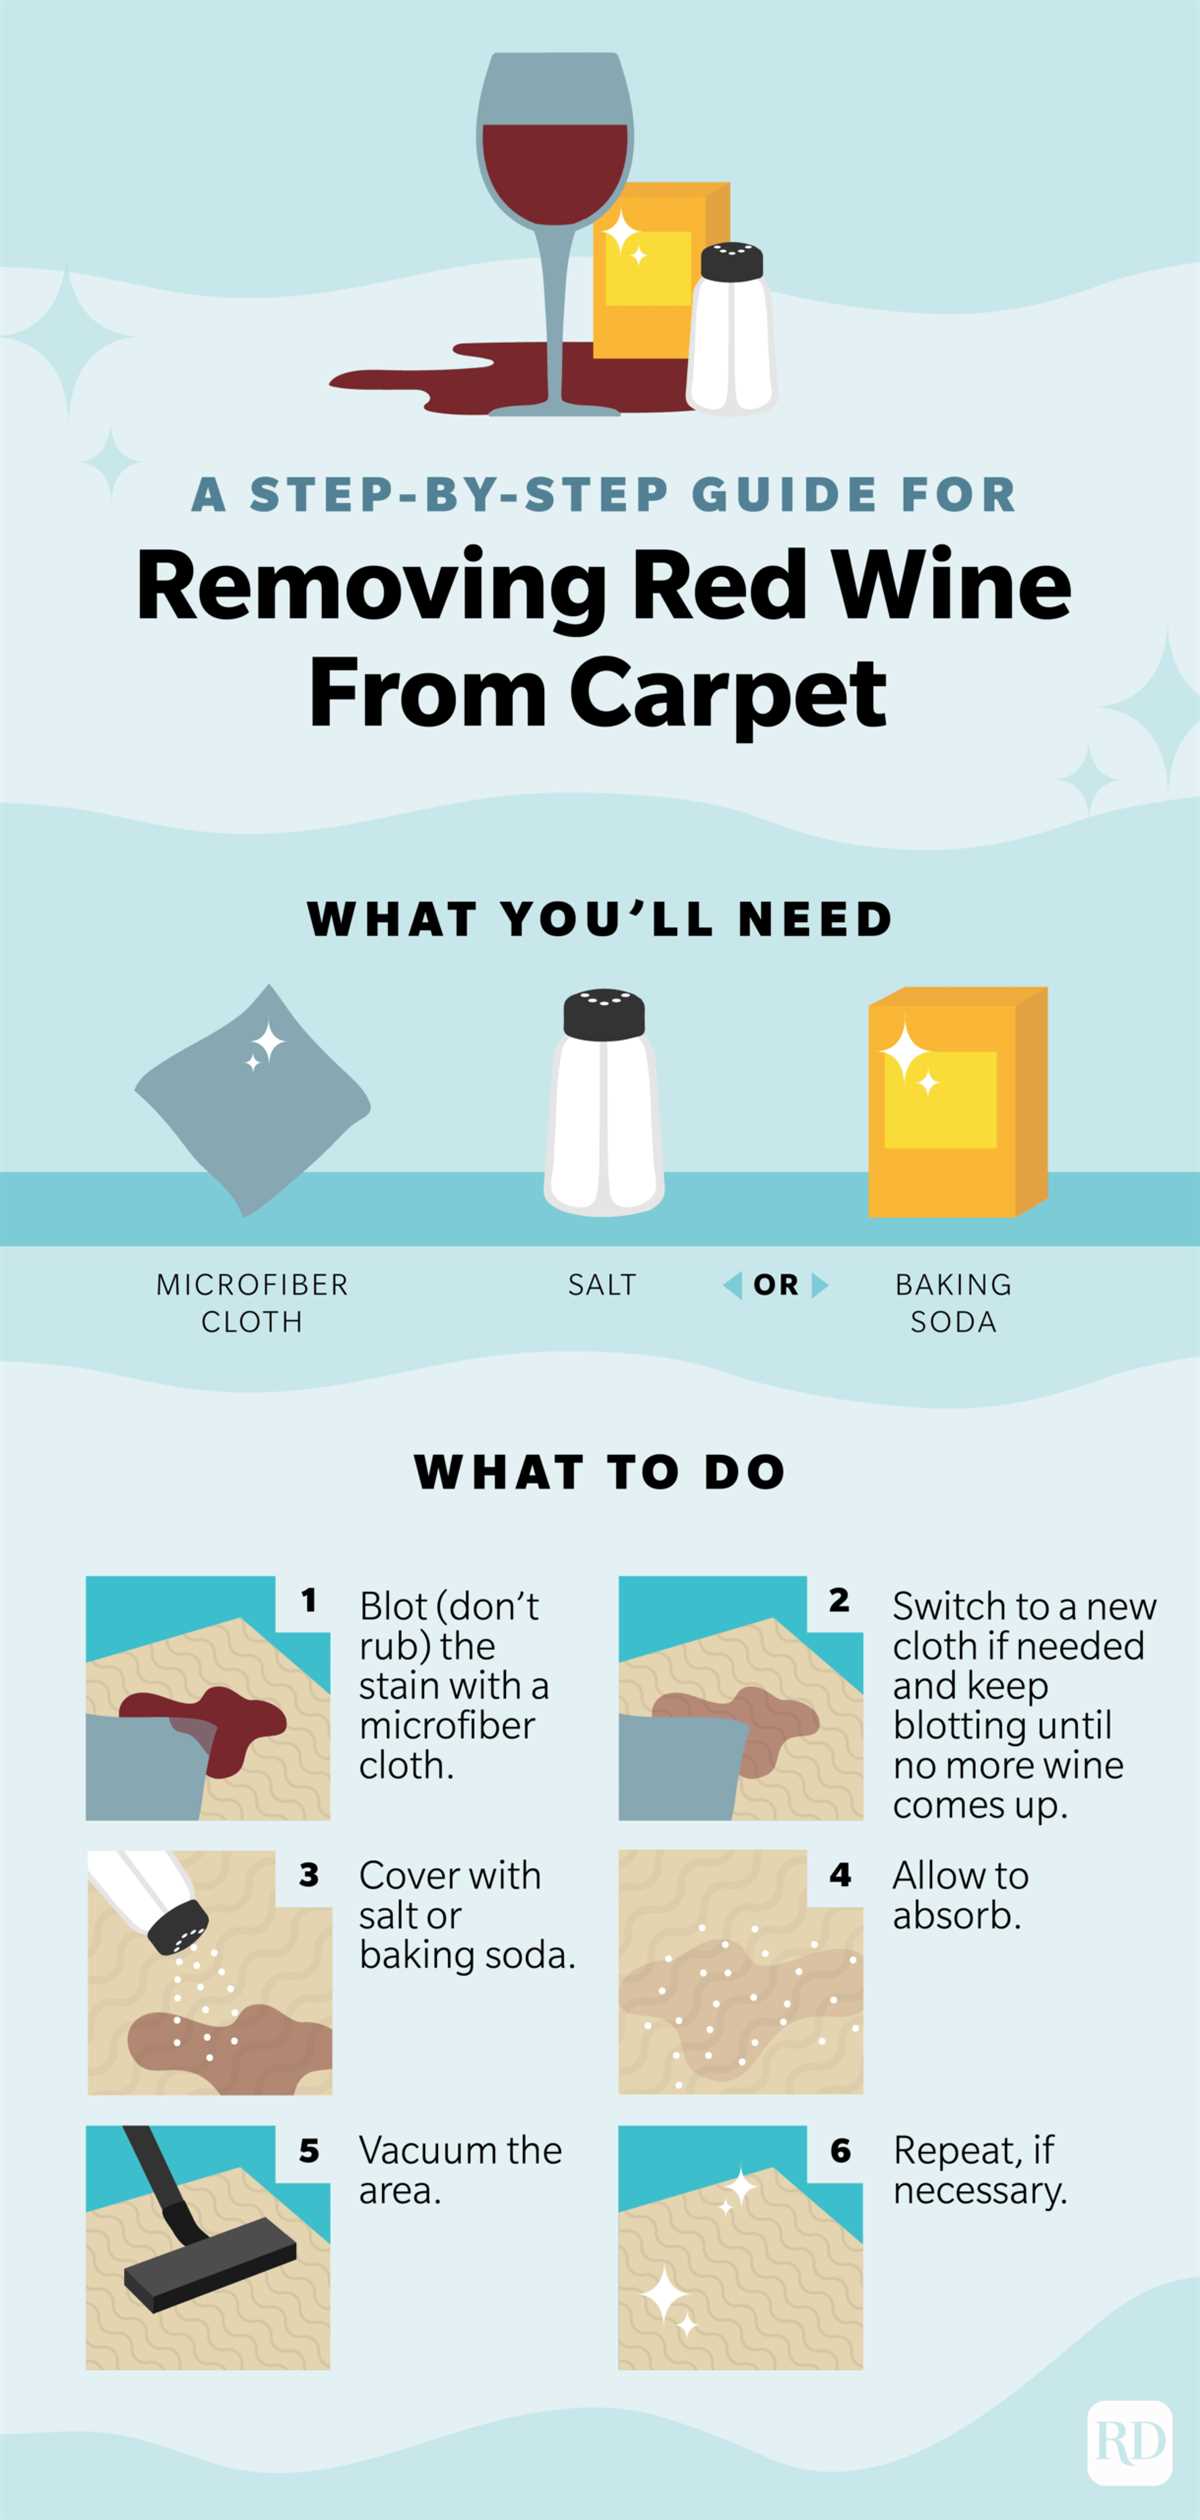 undefinedFast and Simple Home Remedies</strong>“></p>
<h3>1. Salt</h3>
<p>One of the quickest and easiest methods to remove red wine stains from carpets is by using salt. Salt acts as a natural absorbent and helps to pull the red wine out of the carpet fibers.</p><div class='code-block code-block-3' style='margin: 8px 0; clear: both;'>

<div class=